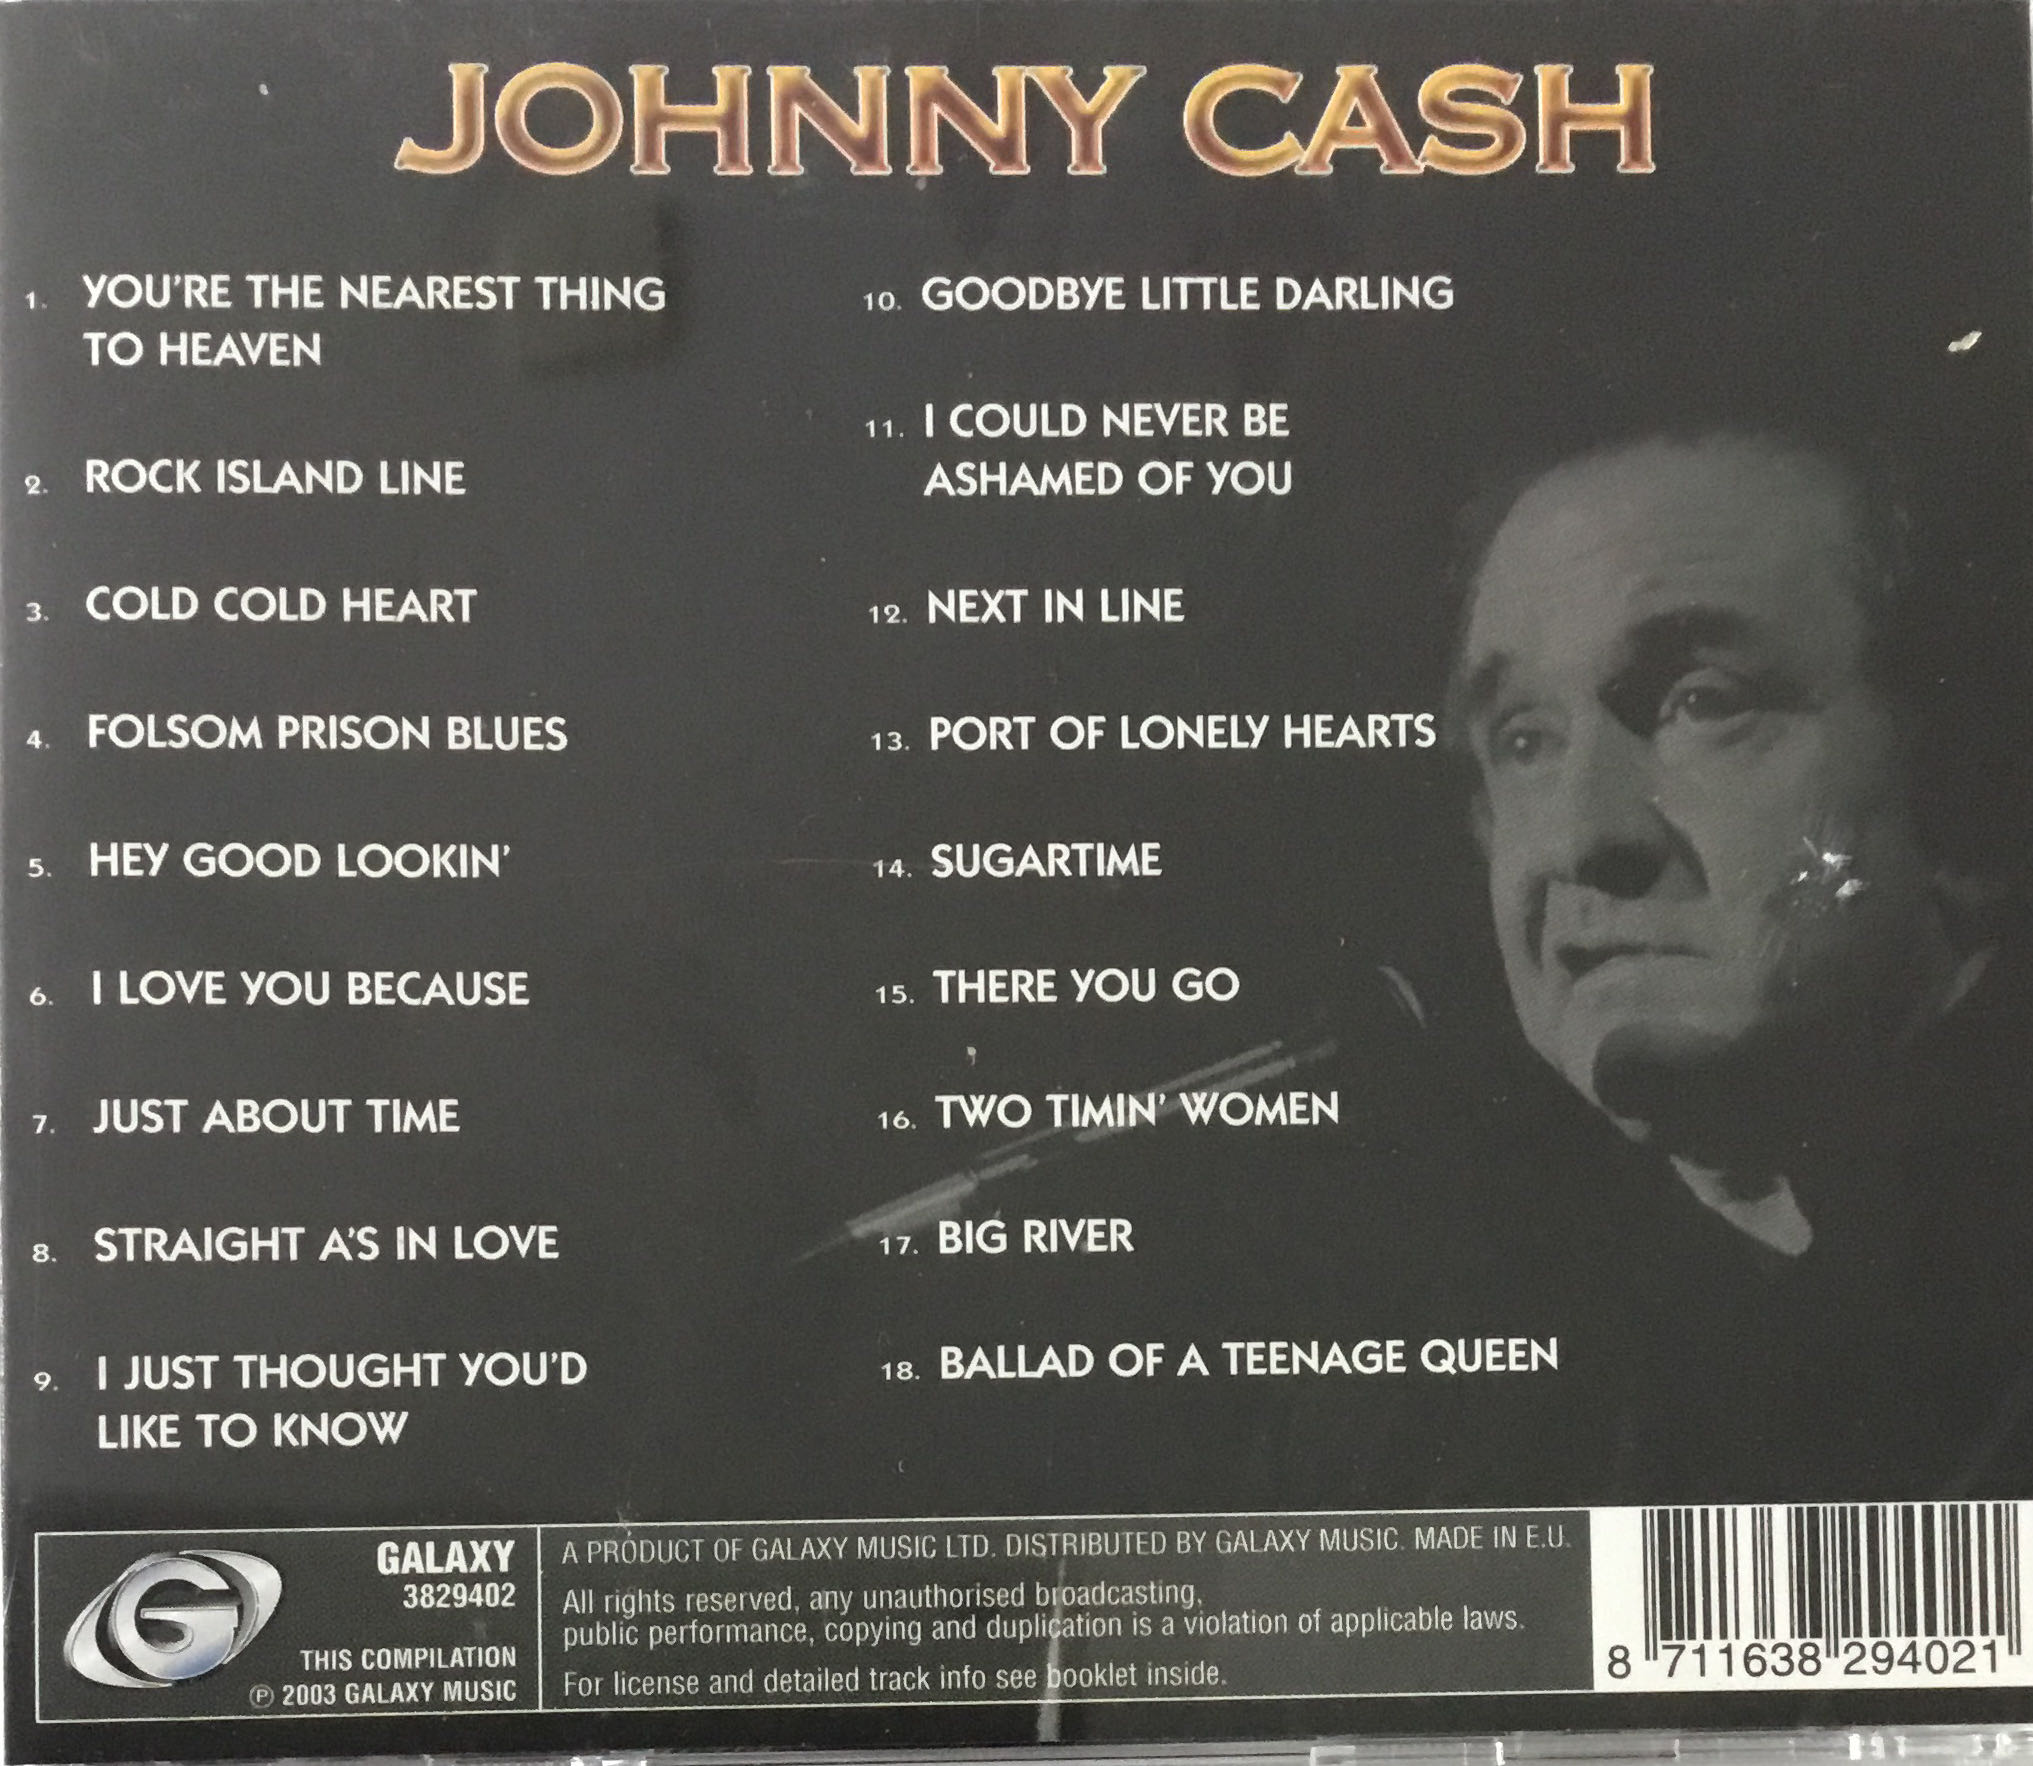 Johnny Cash - Cash, Johnny (CD - 0) music collectible [Barcode 8711638294021] - Main Image 2